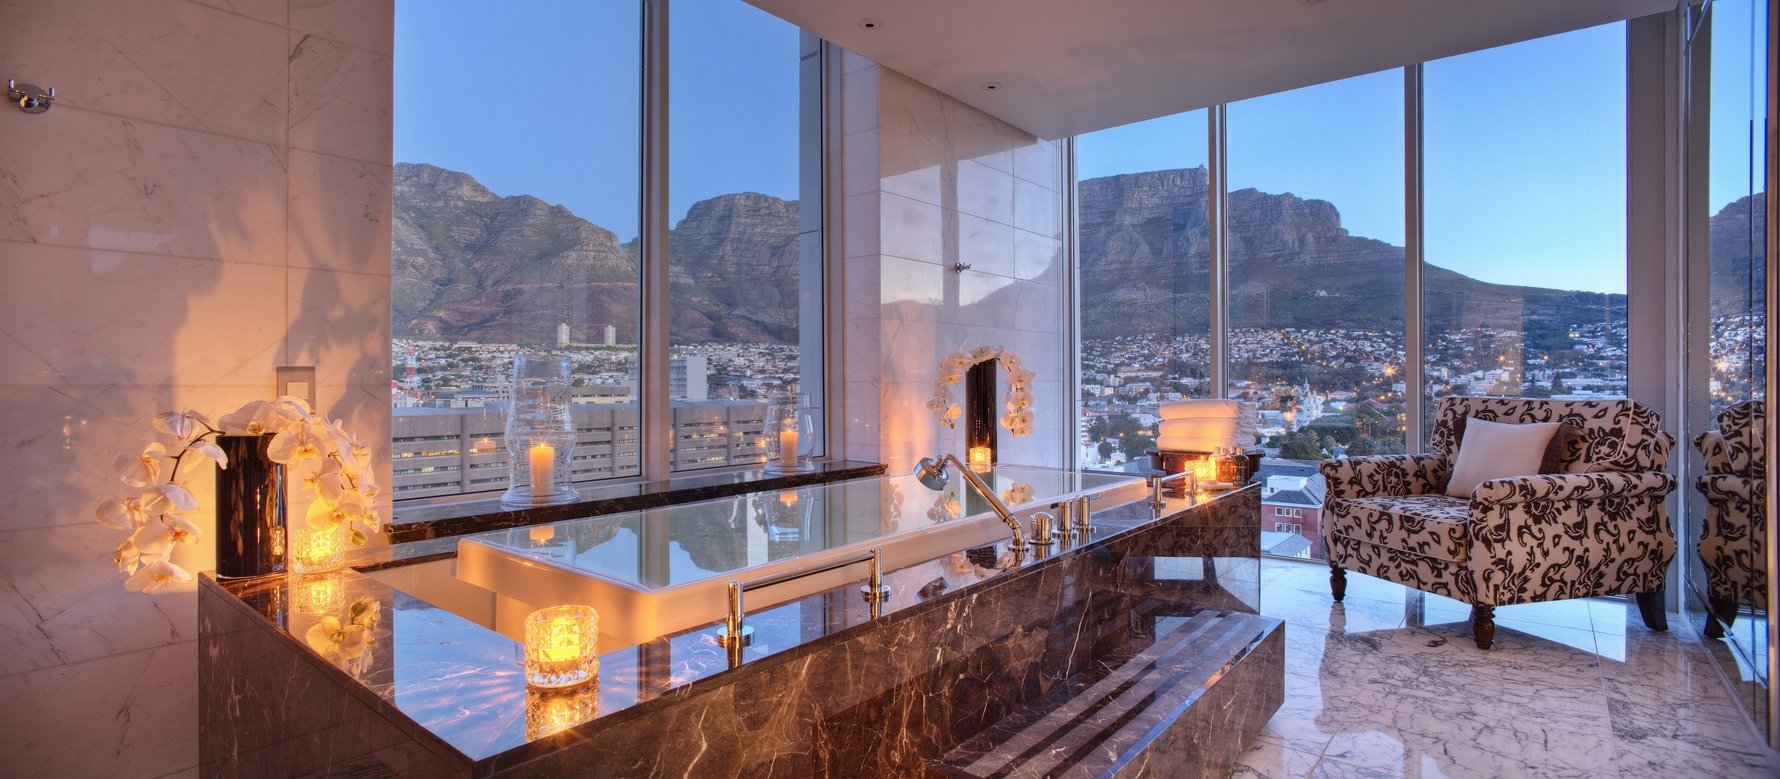 The bathroom of the Presidential Suite at Taj Cape Town. We fell in love.